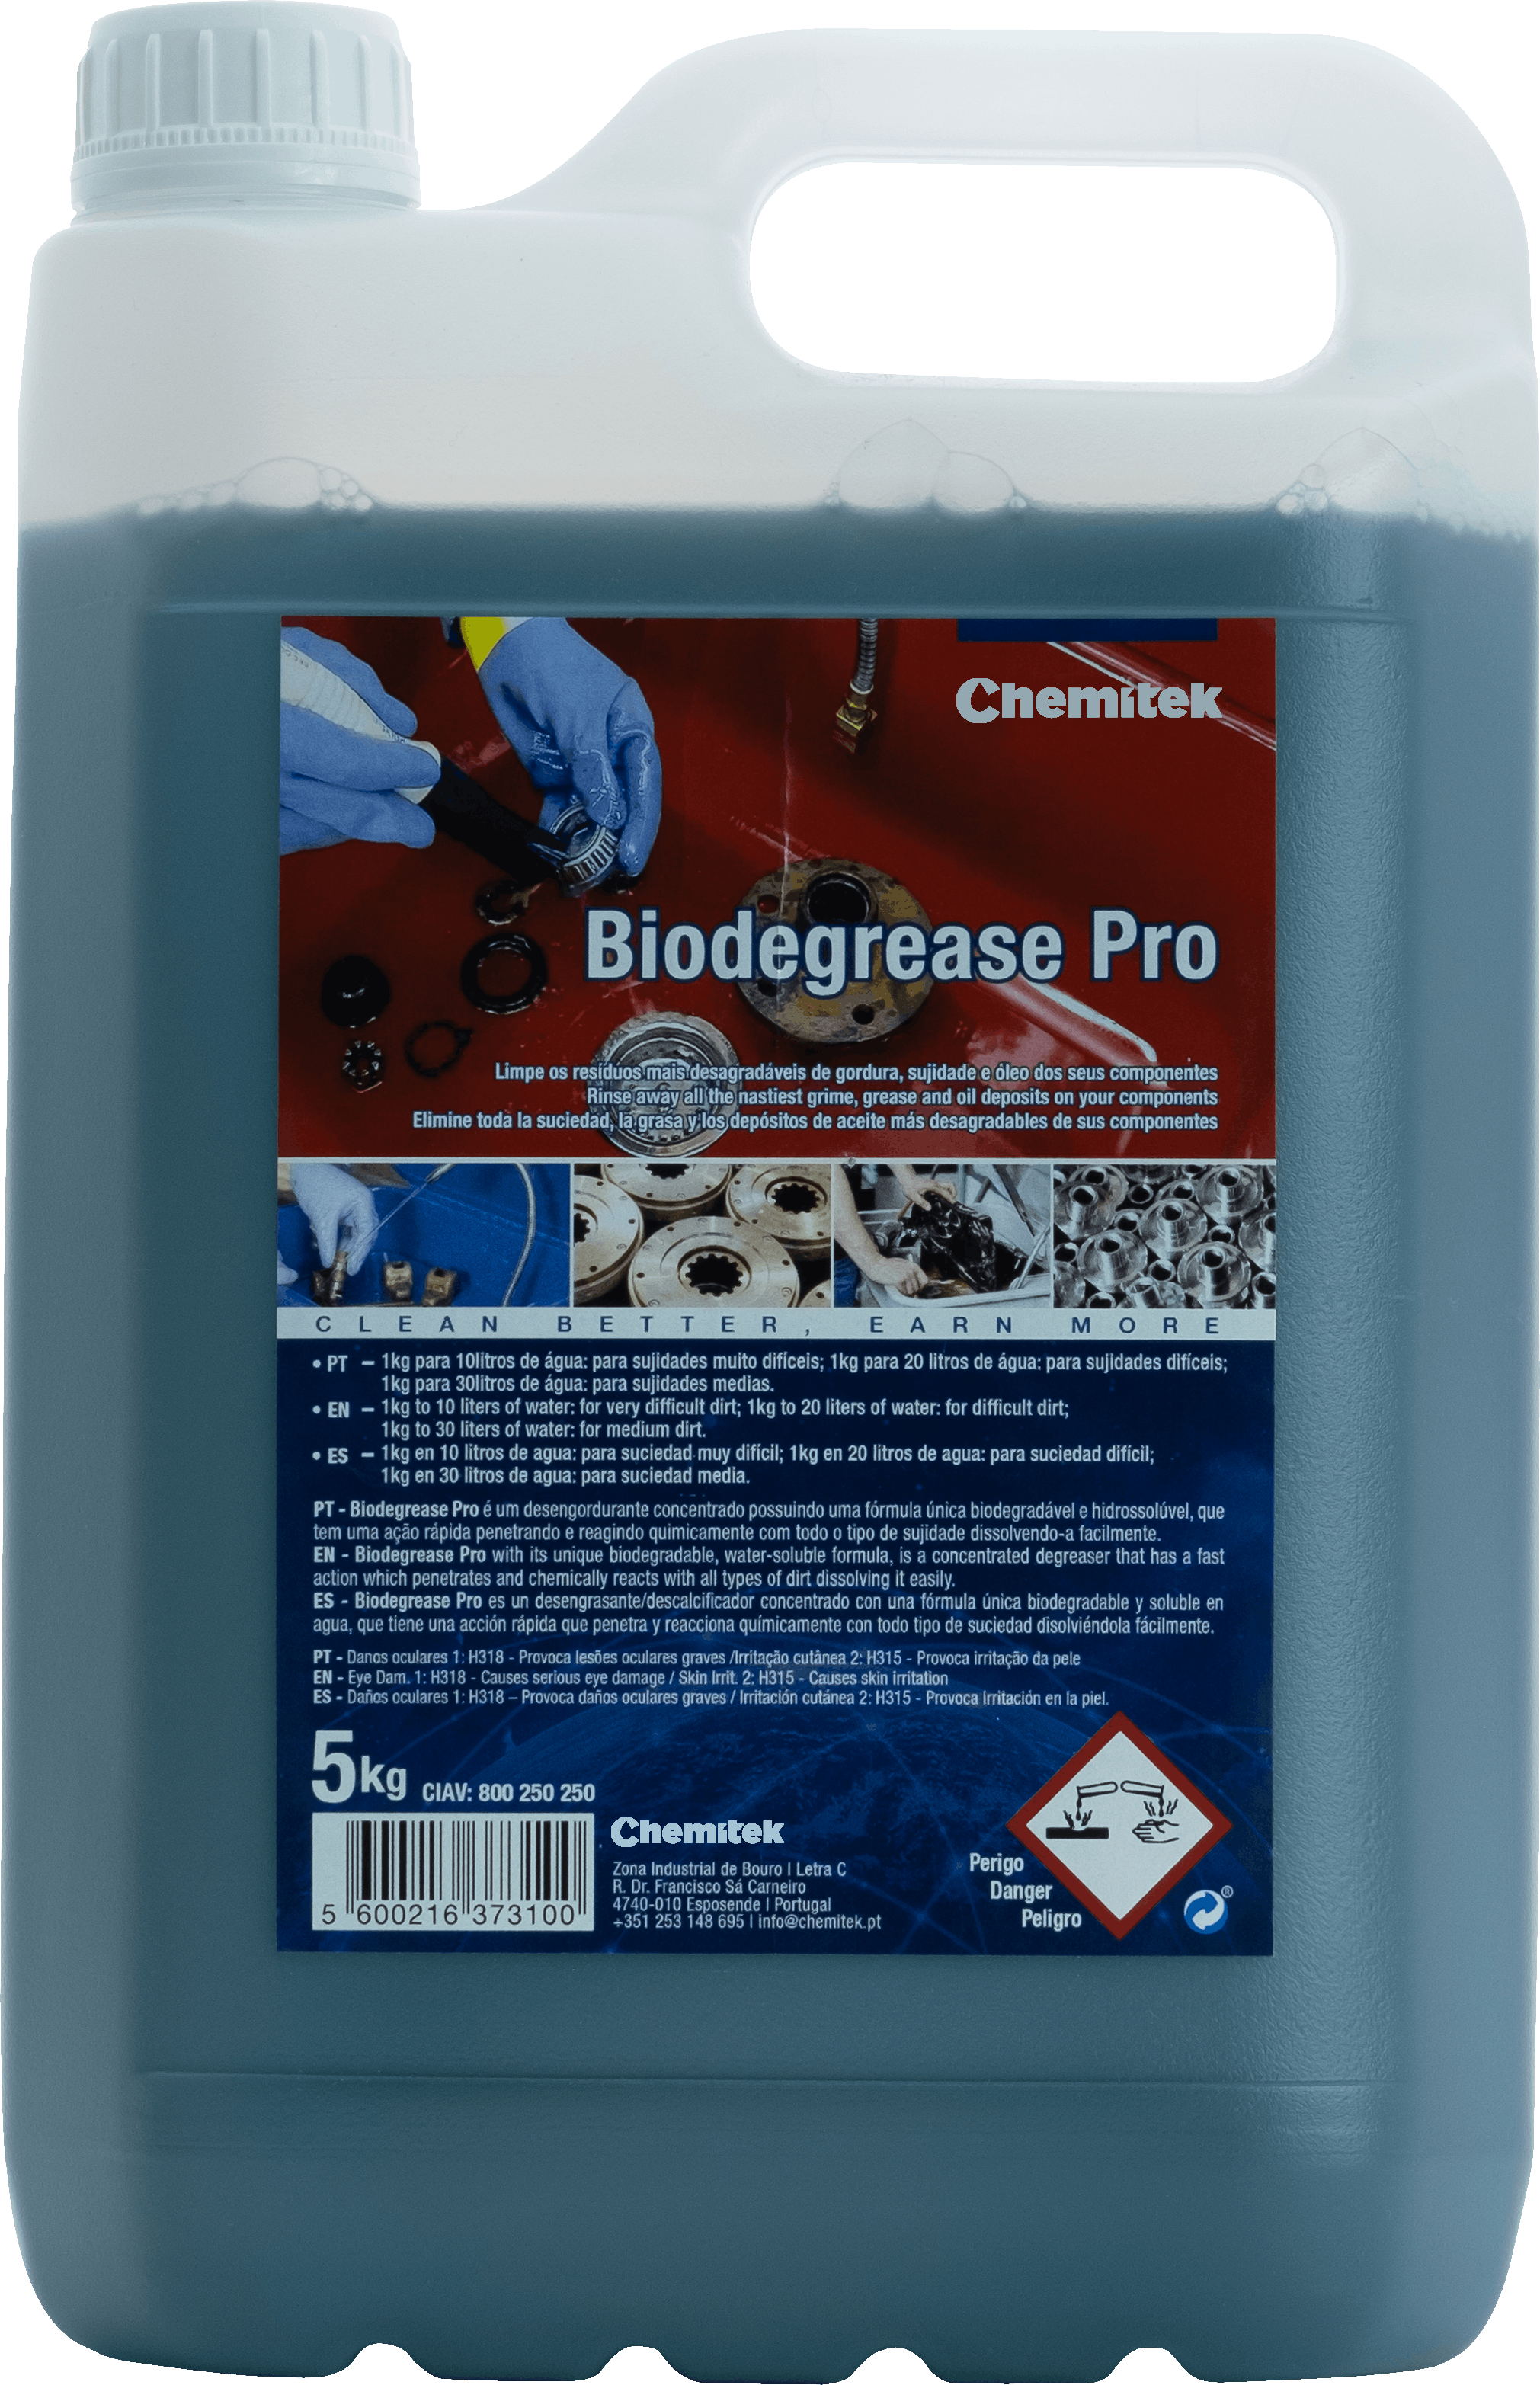 Product - Biodegrease Pro